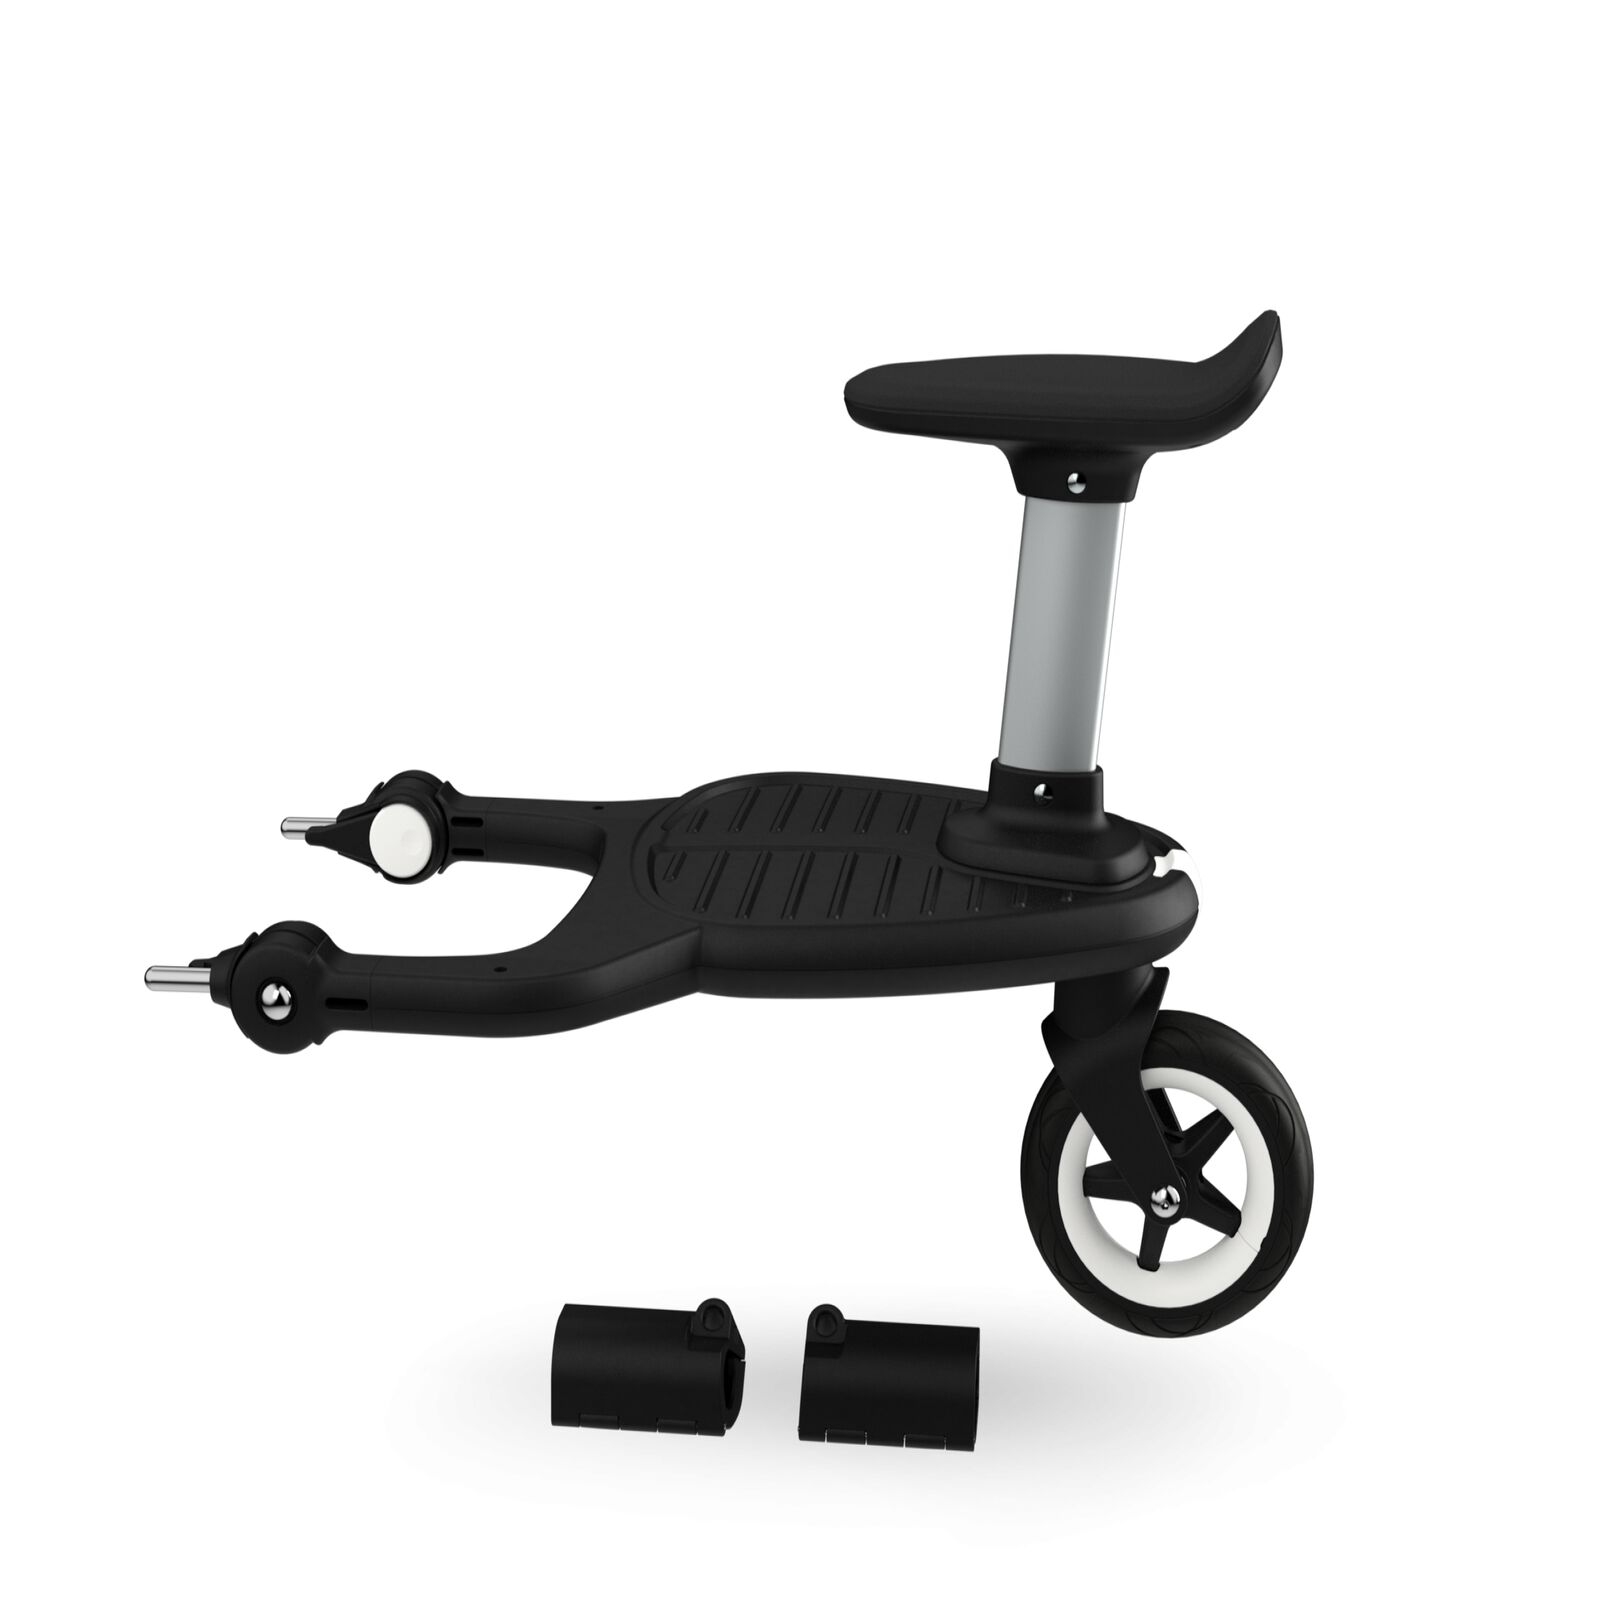 Bugaboo Cameleon 3 adapter for Bugaboo comfort wheeled board - View 1